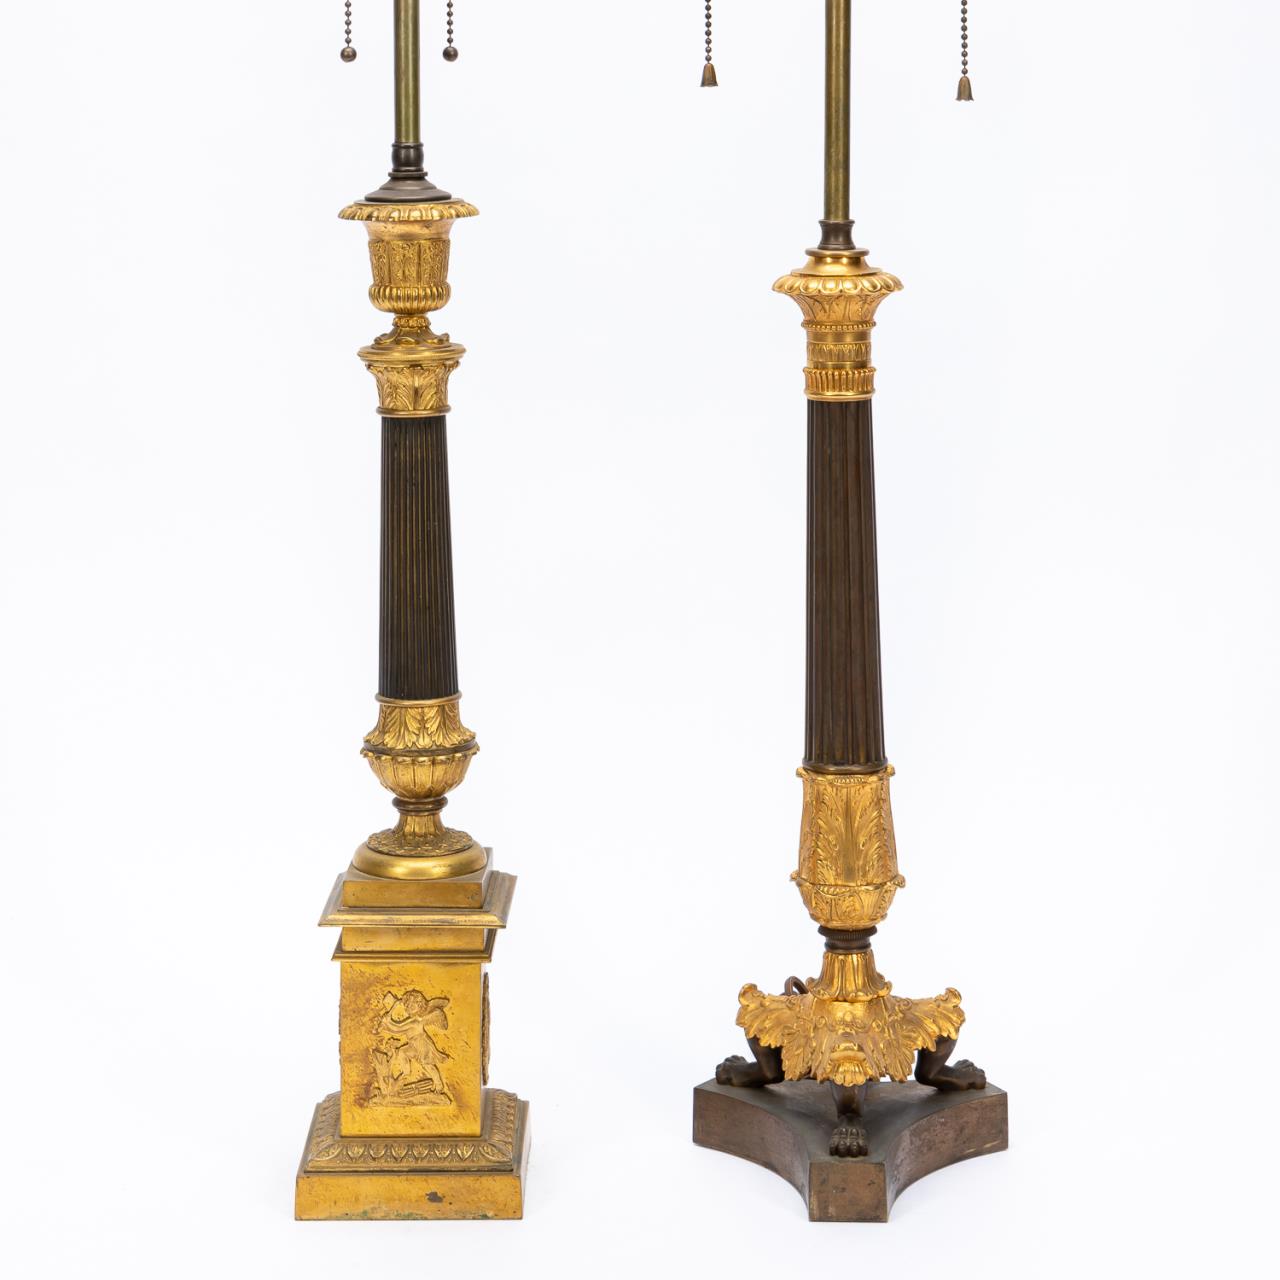 GROUP OF 2, 19TH C. FRENCH GILT